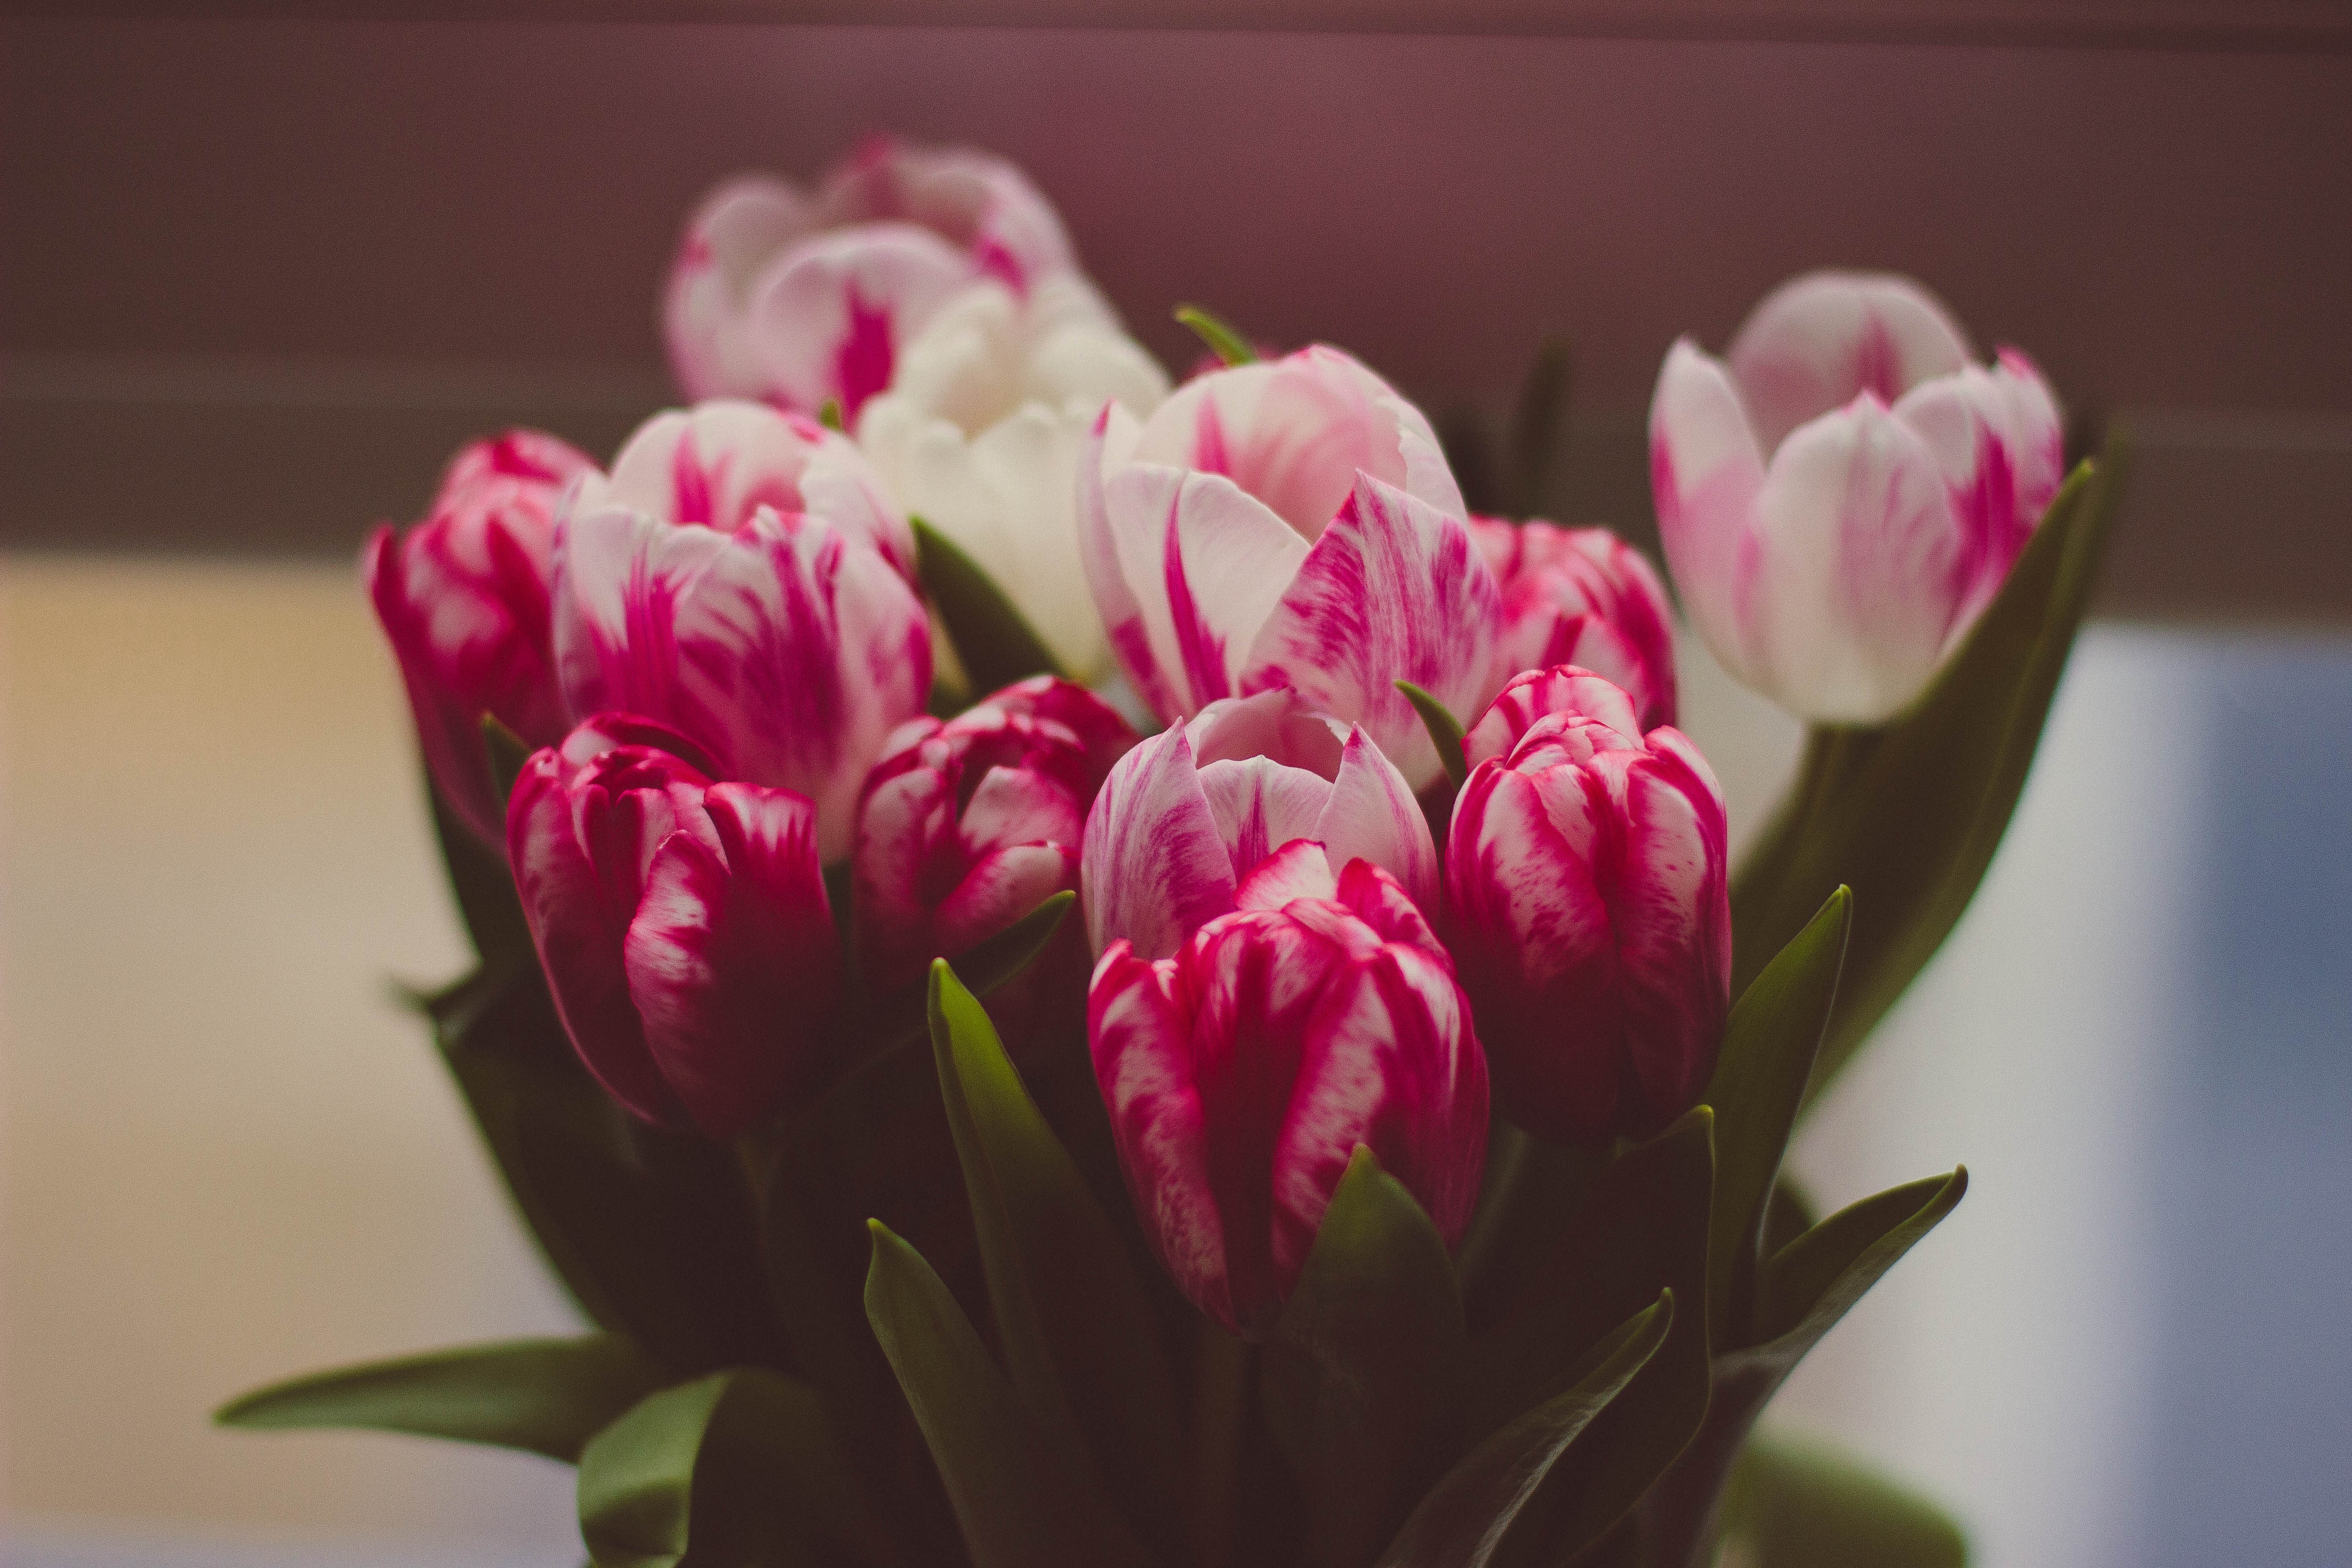 pink and white flowers in close-up photography